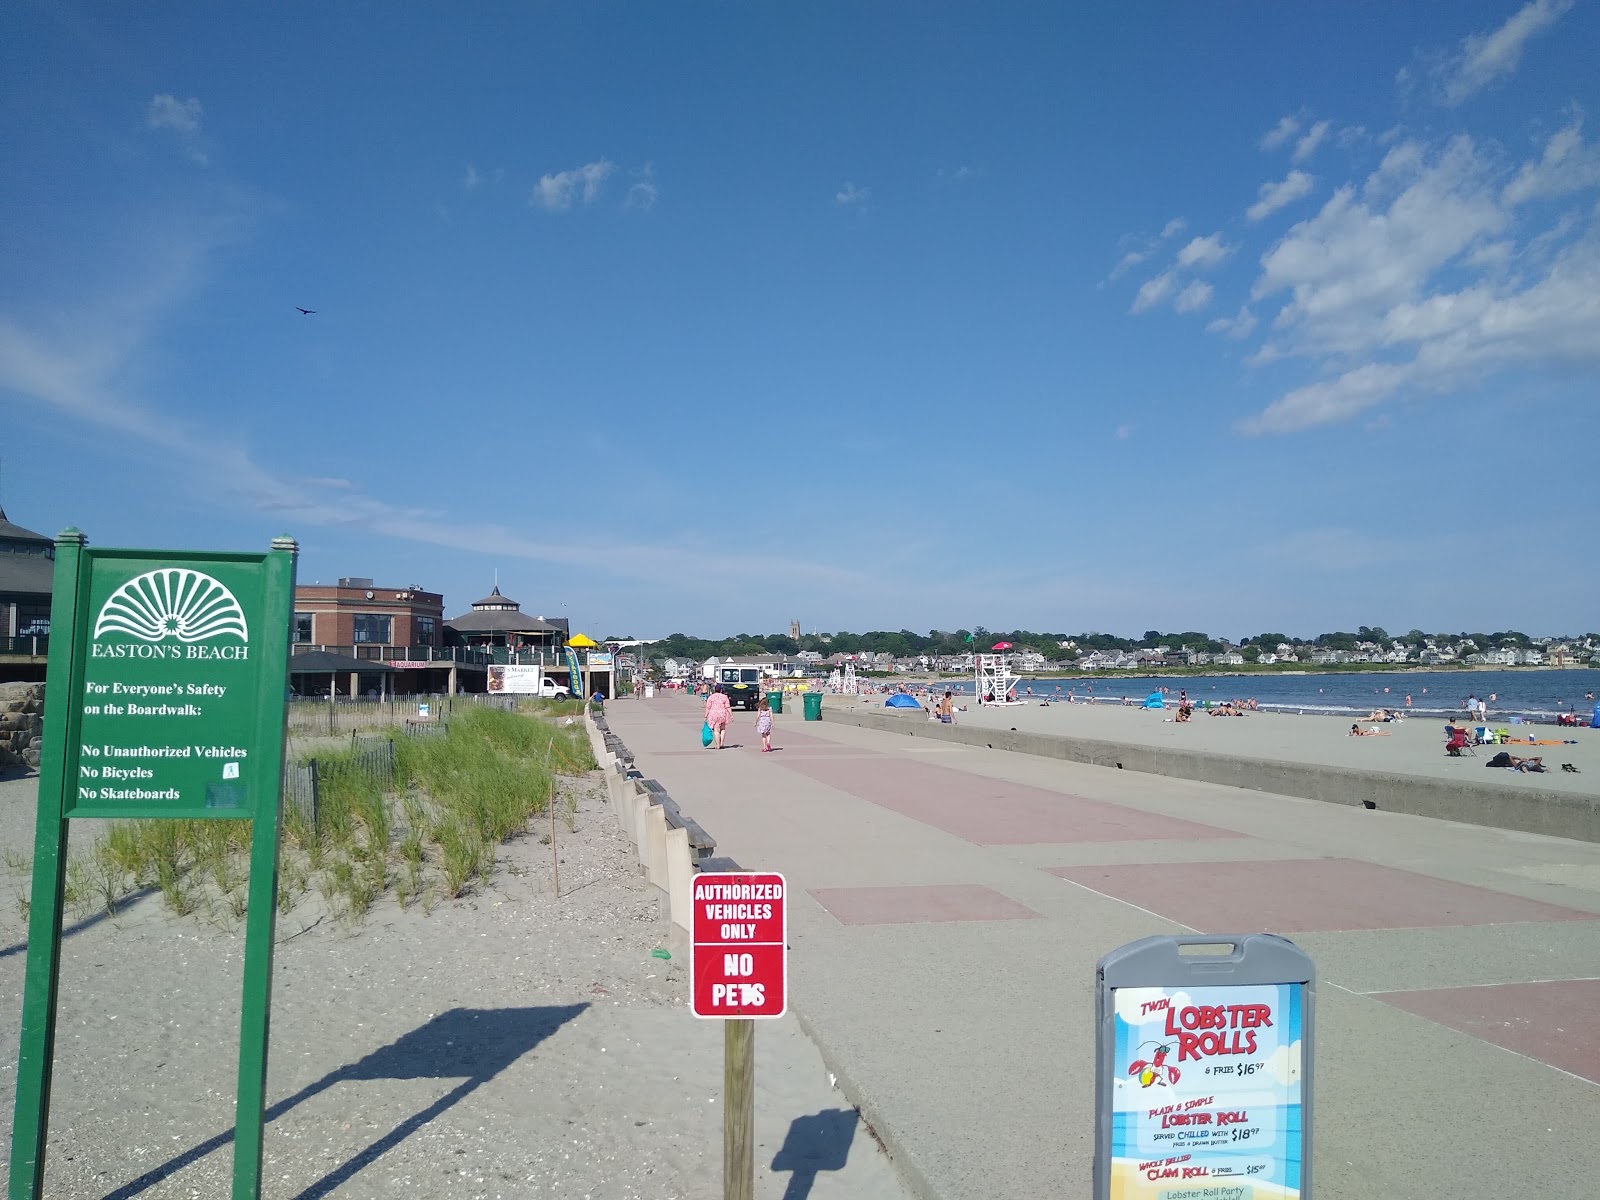 Photo of Easton's Beach with partly clean level of cleanliness